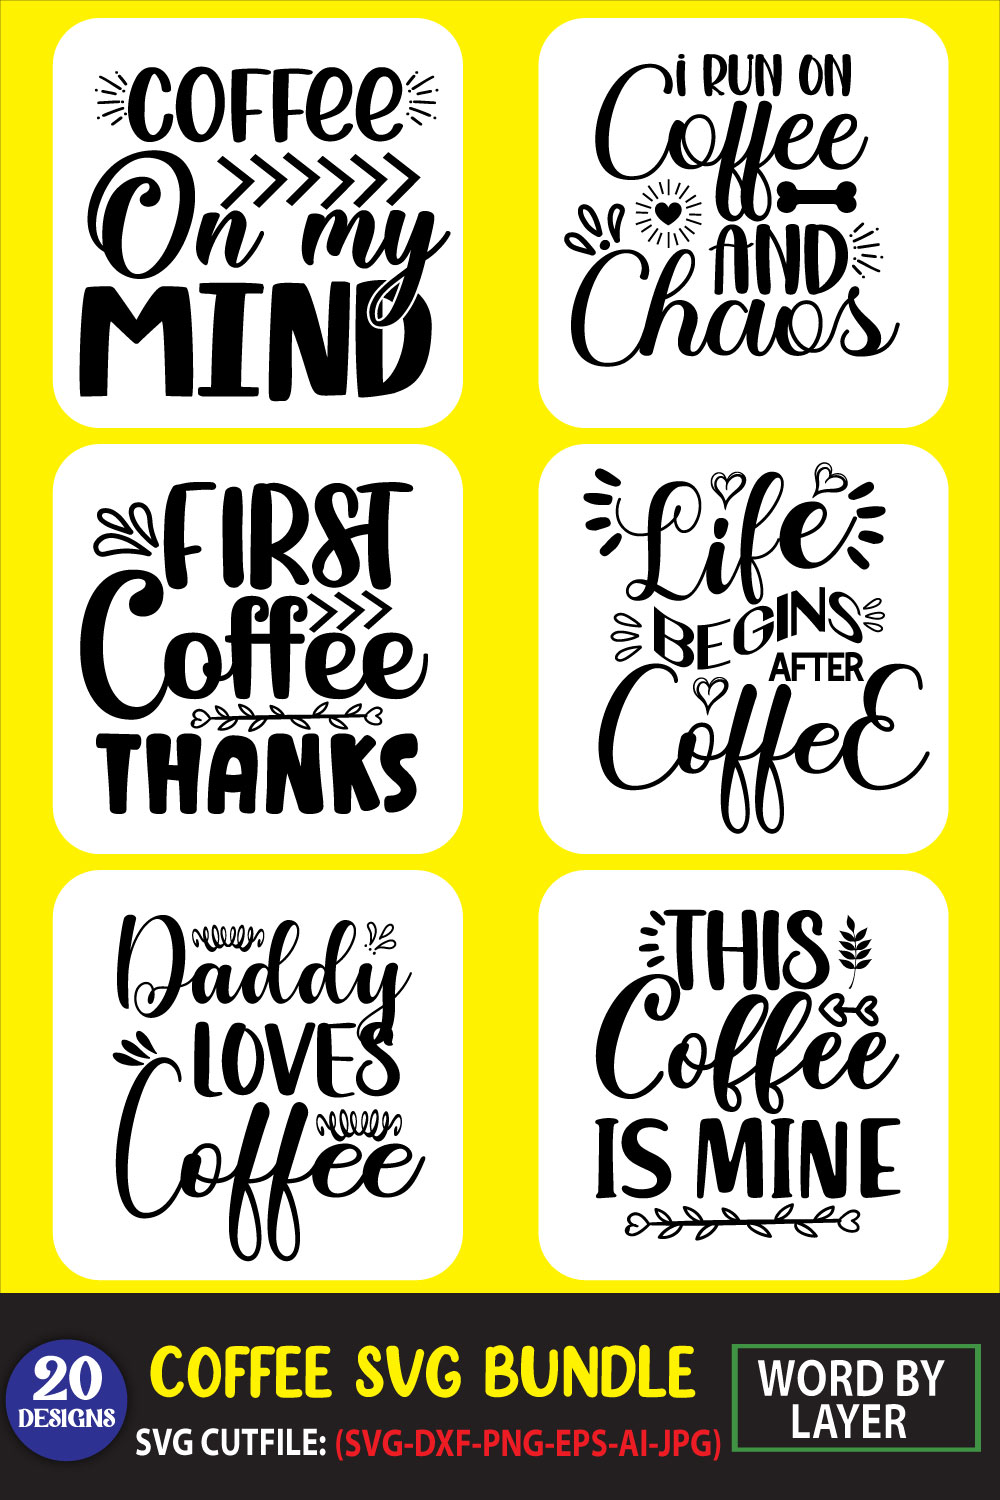 Pack of charming images for prints on the theme of coffee